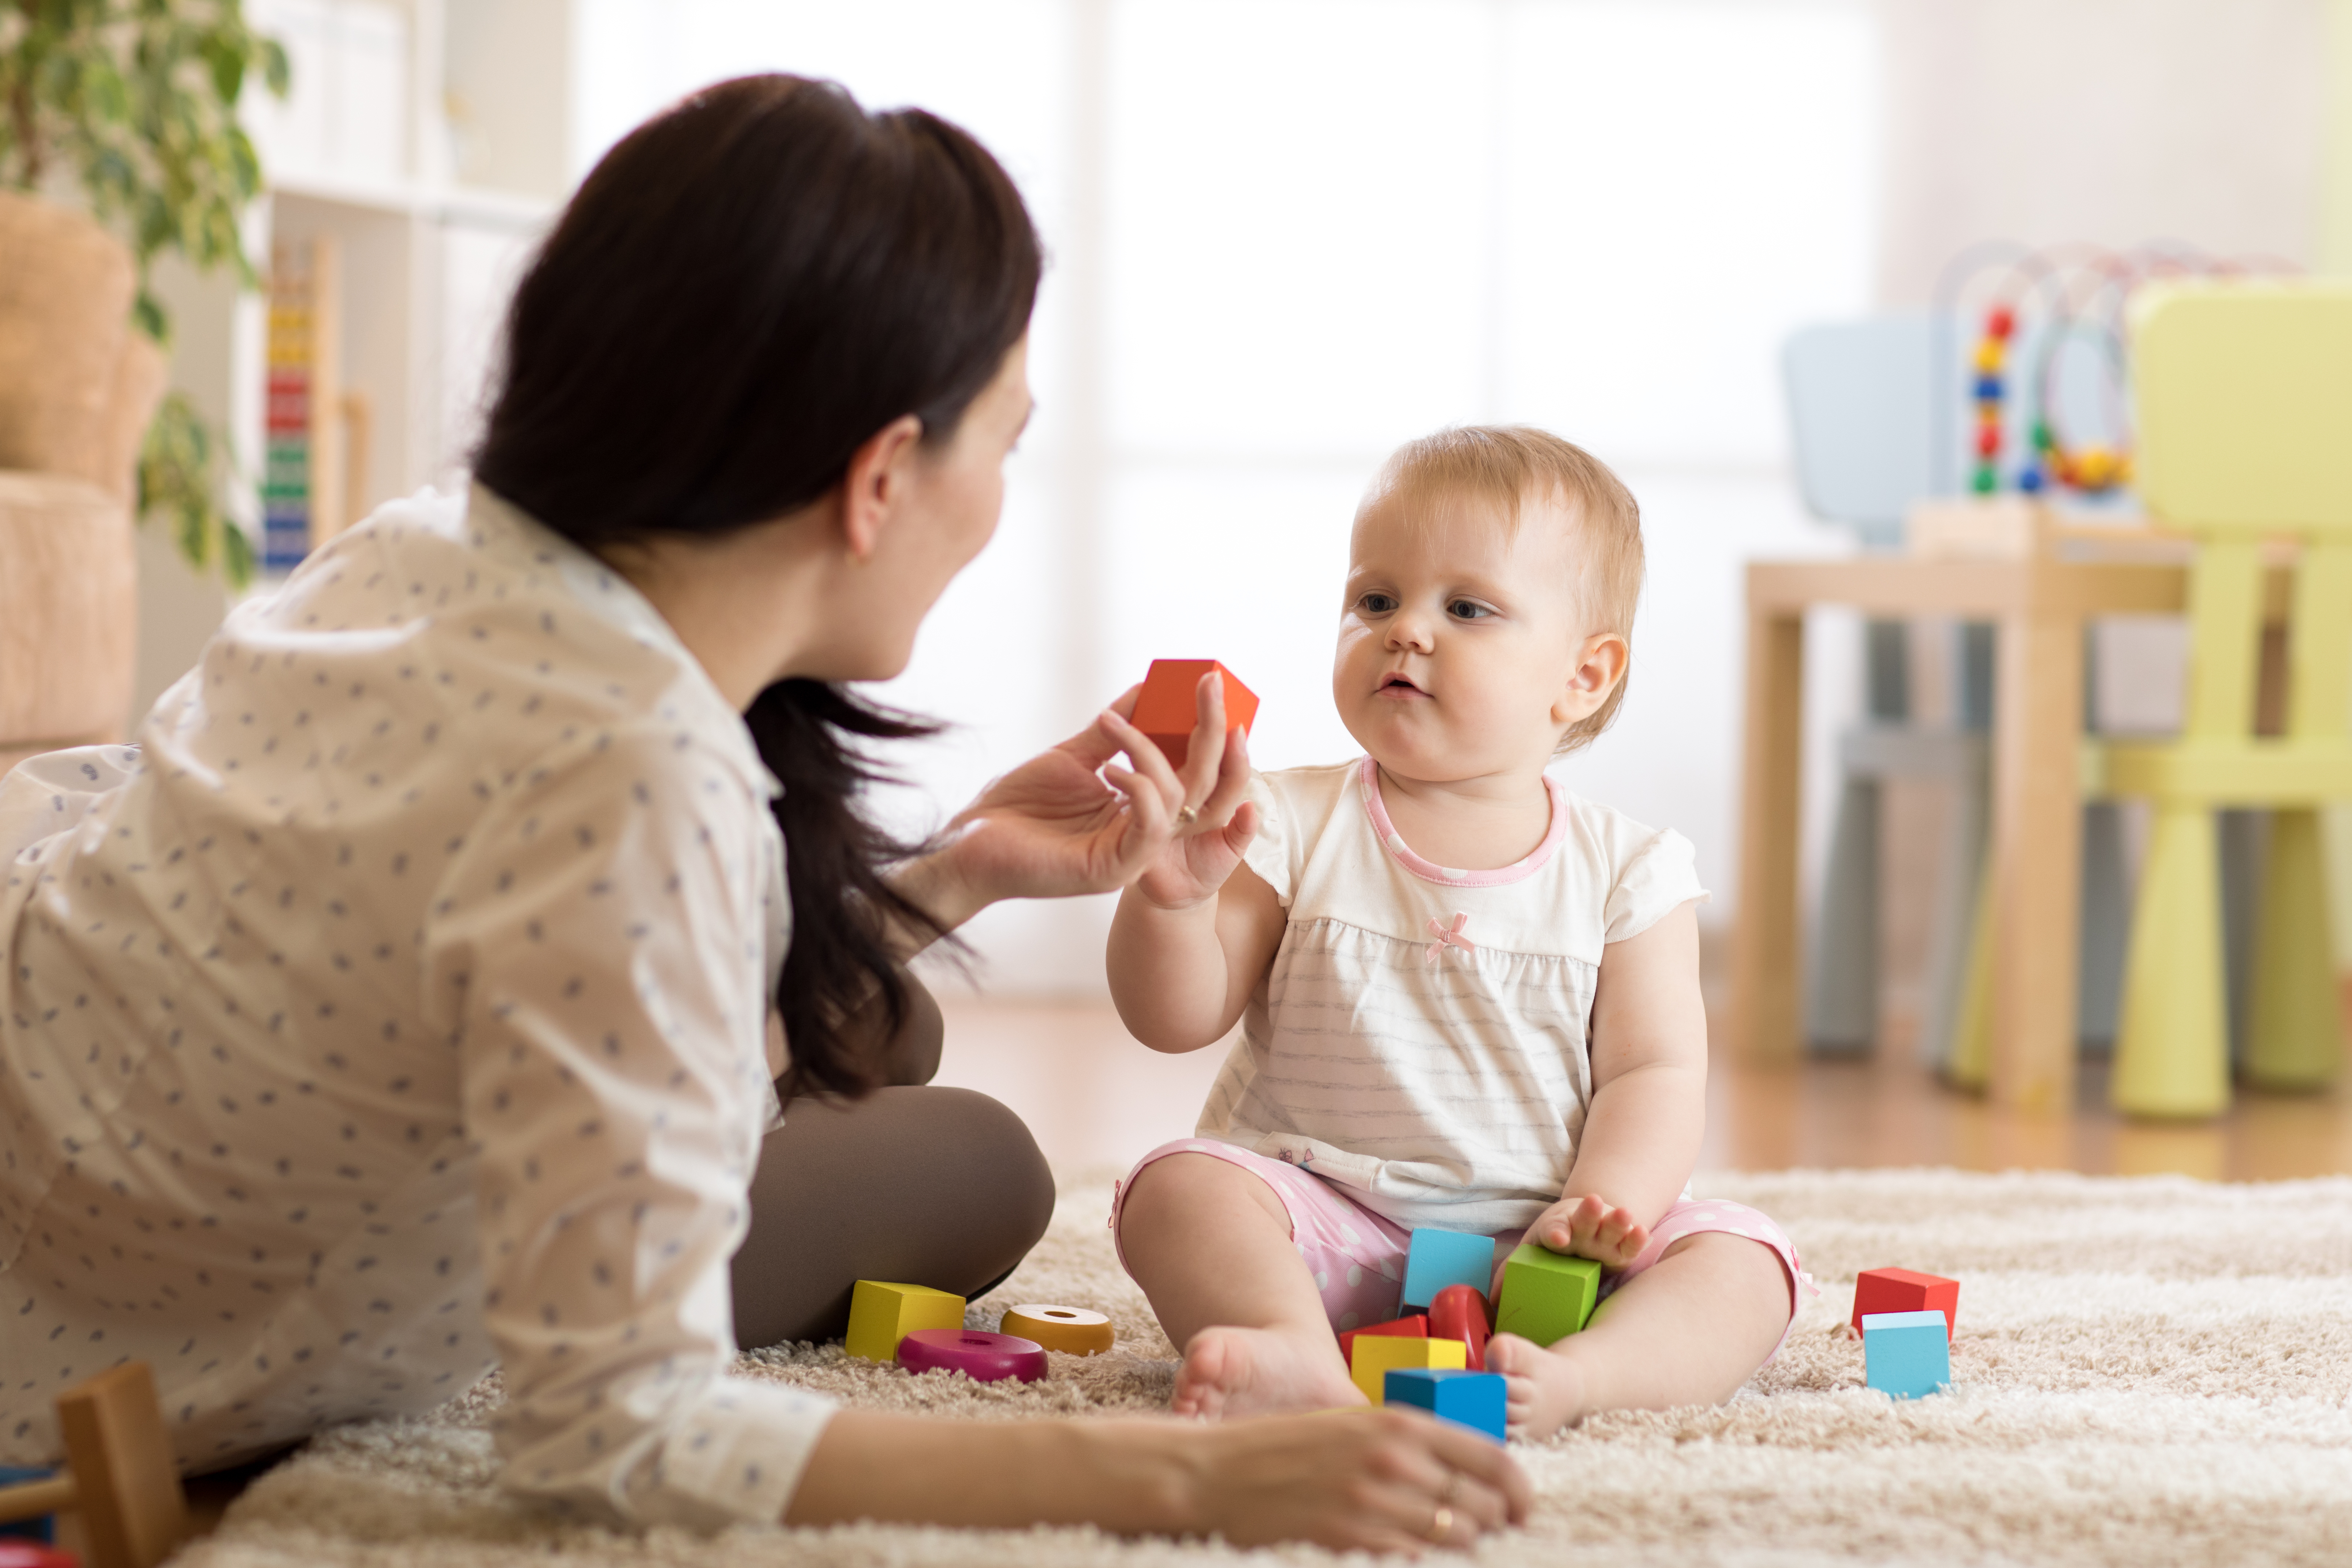 A woman playing with a baby | Source: Shutterstock